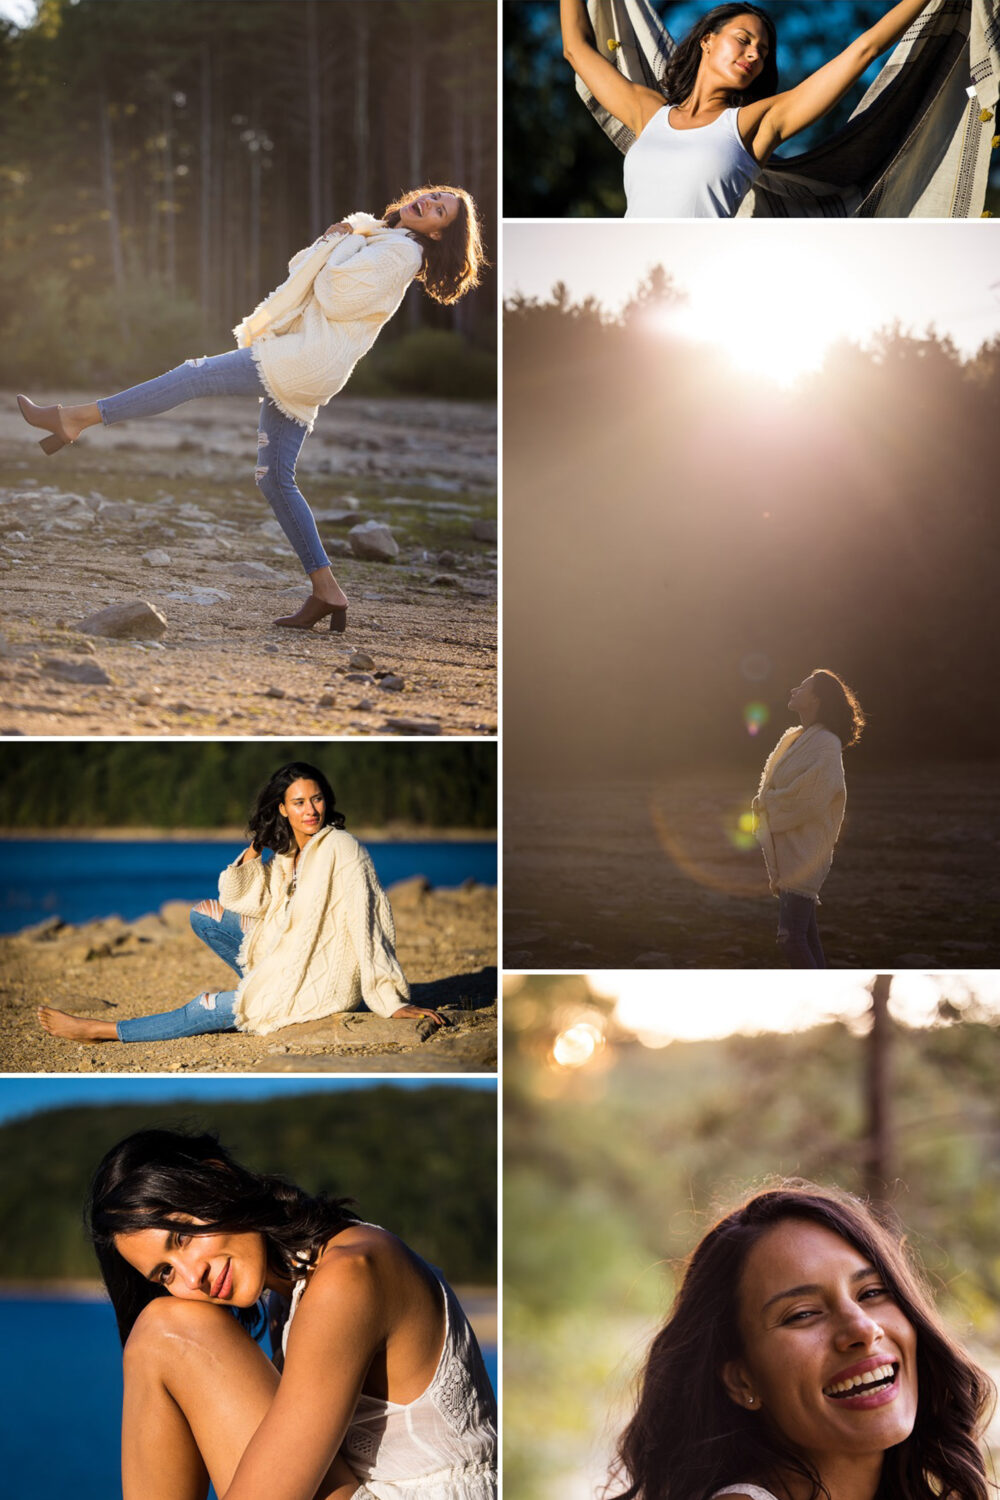 Image of this creative female business branding photography session's gallery to showcase the various images